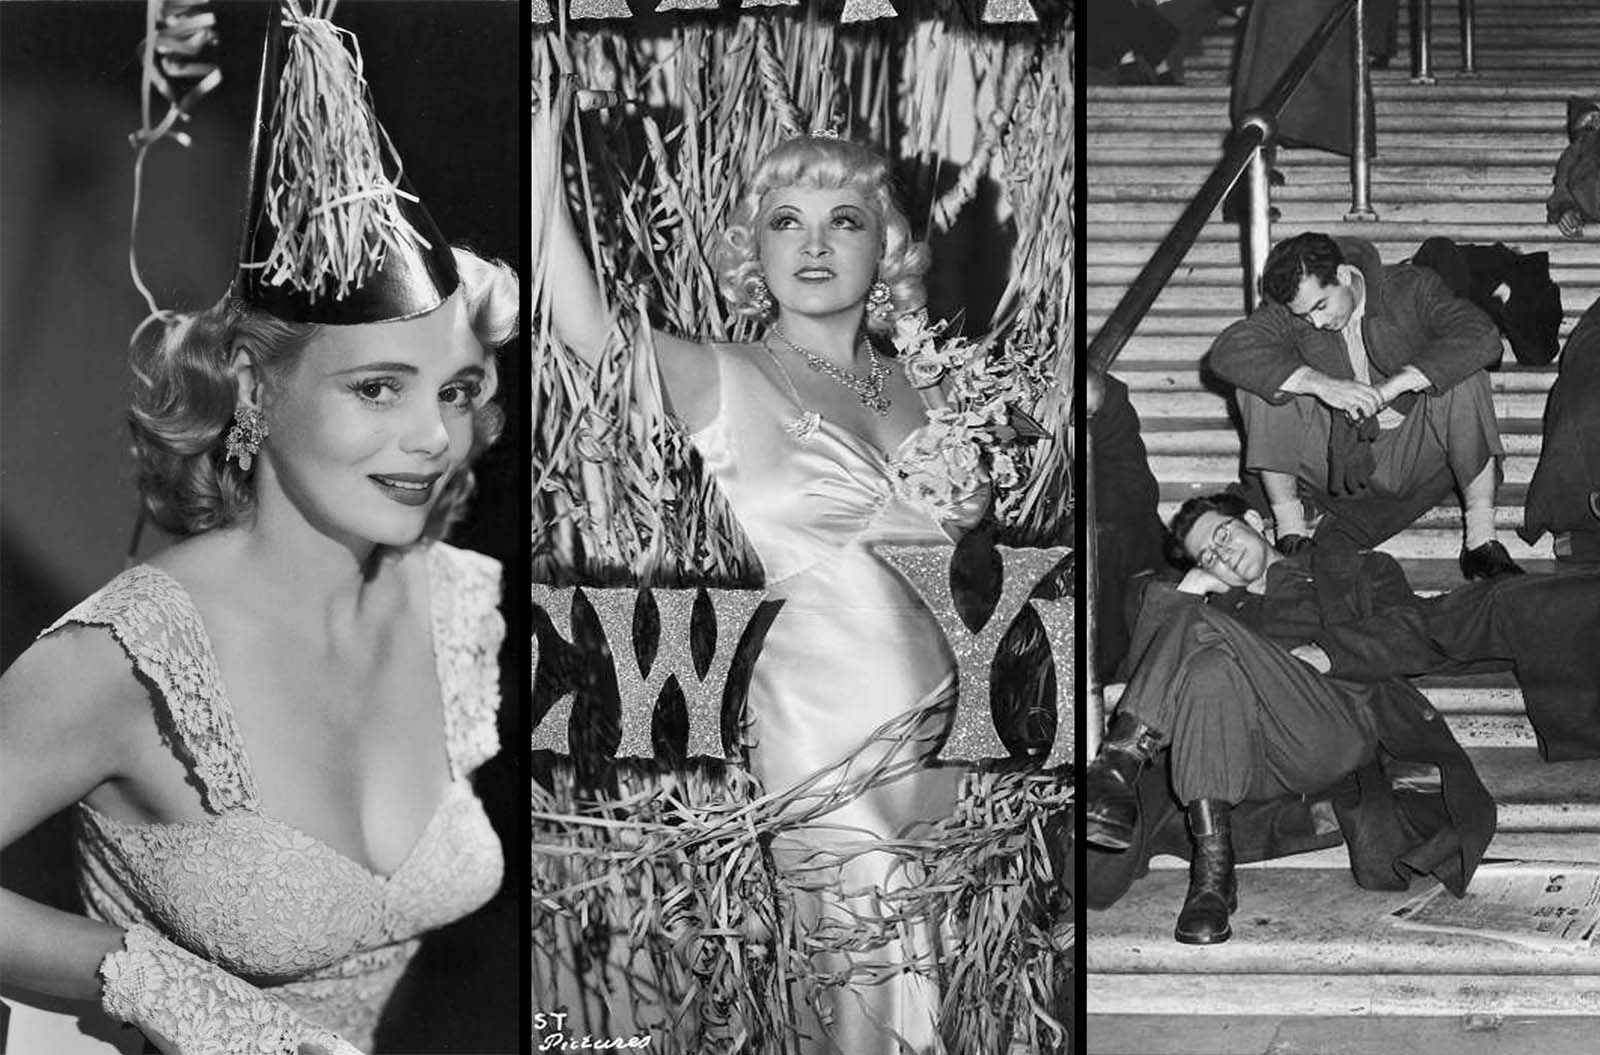 Fun Vintage Photos Show How People Celebrated New Year's Eve in 1930s to 1950s